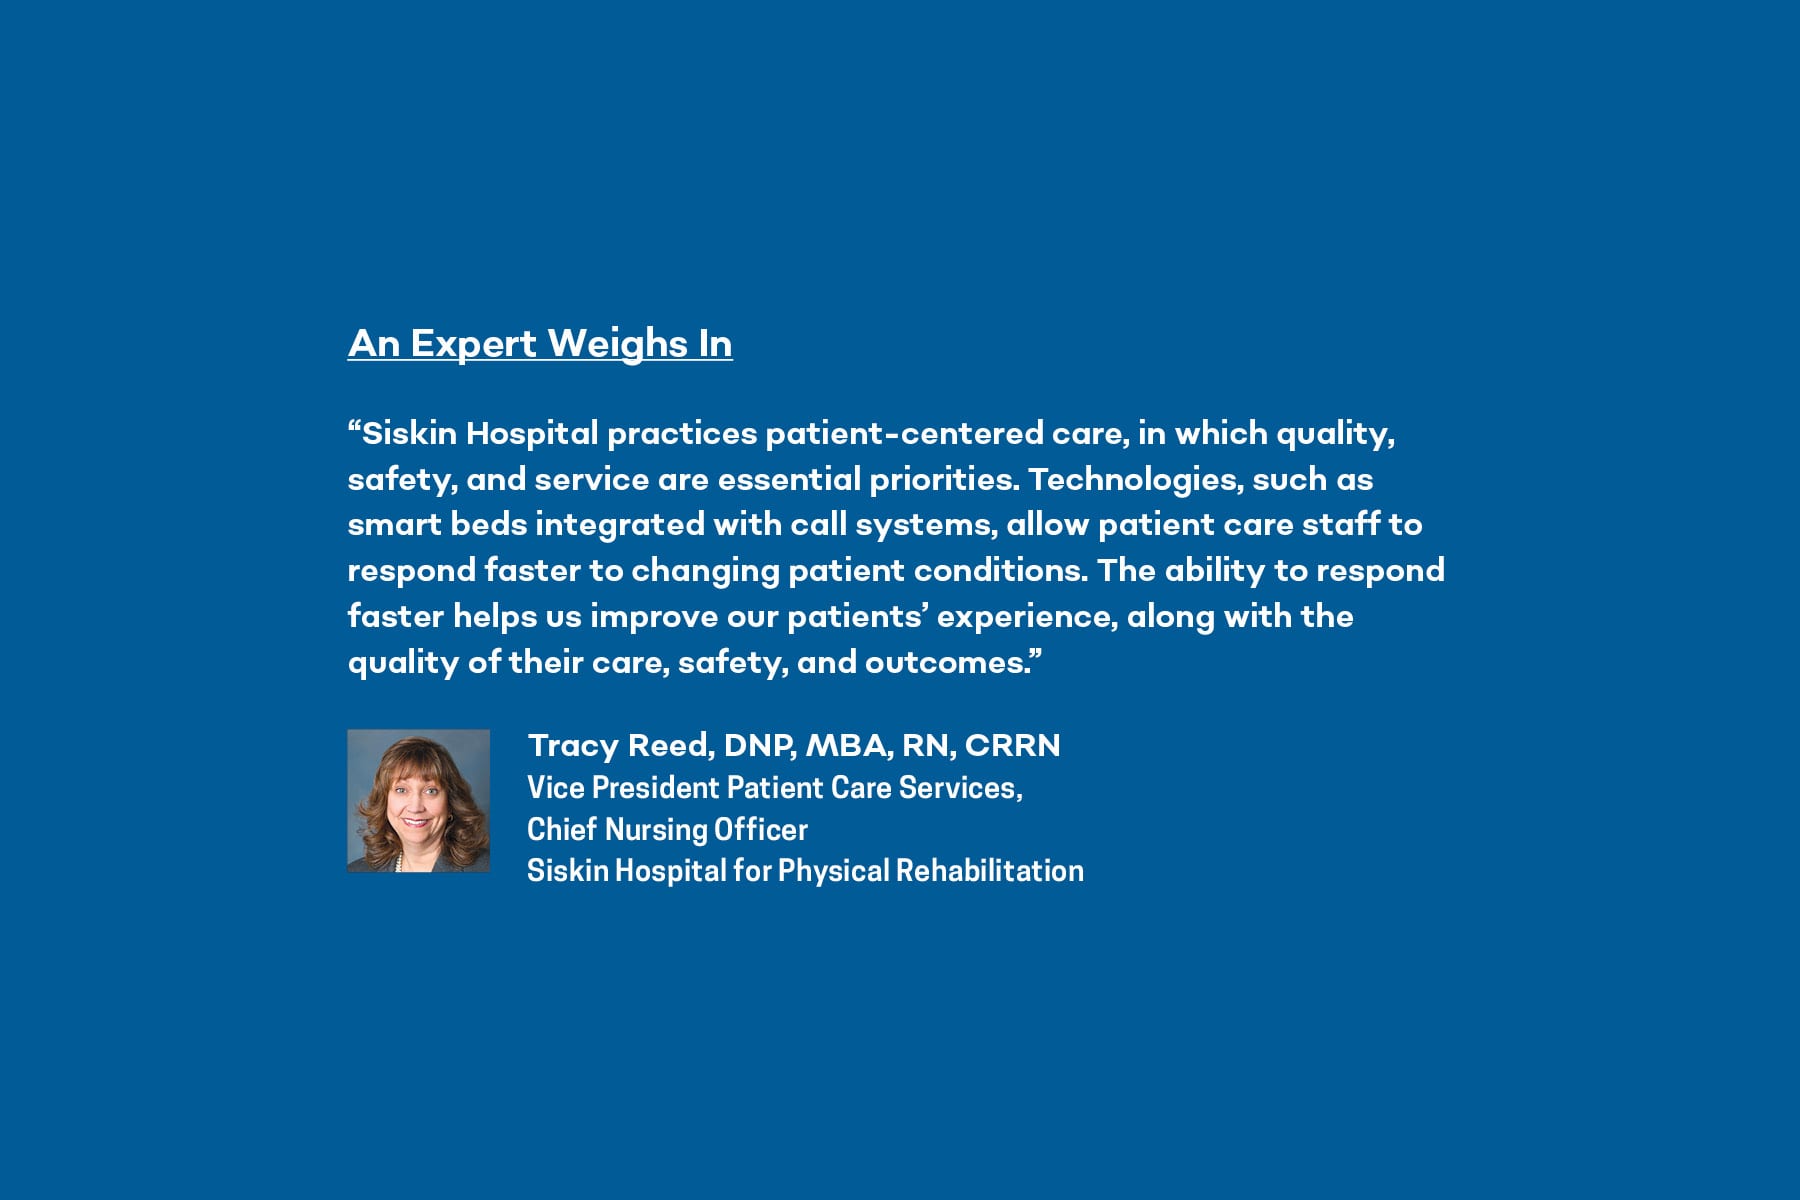 Tracy Reed, Vice President of Patient Care Services and Chief Nursing Officer at Siskin Hospital for Physical rehabilitation shares her expert opinion on new bedside technologies